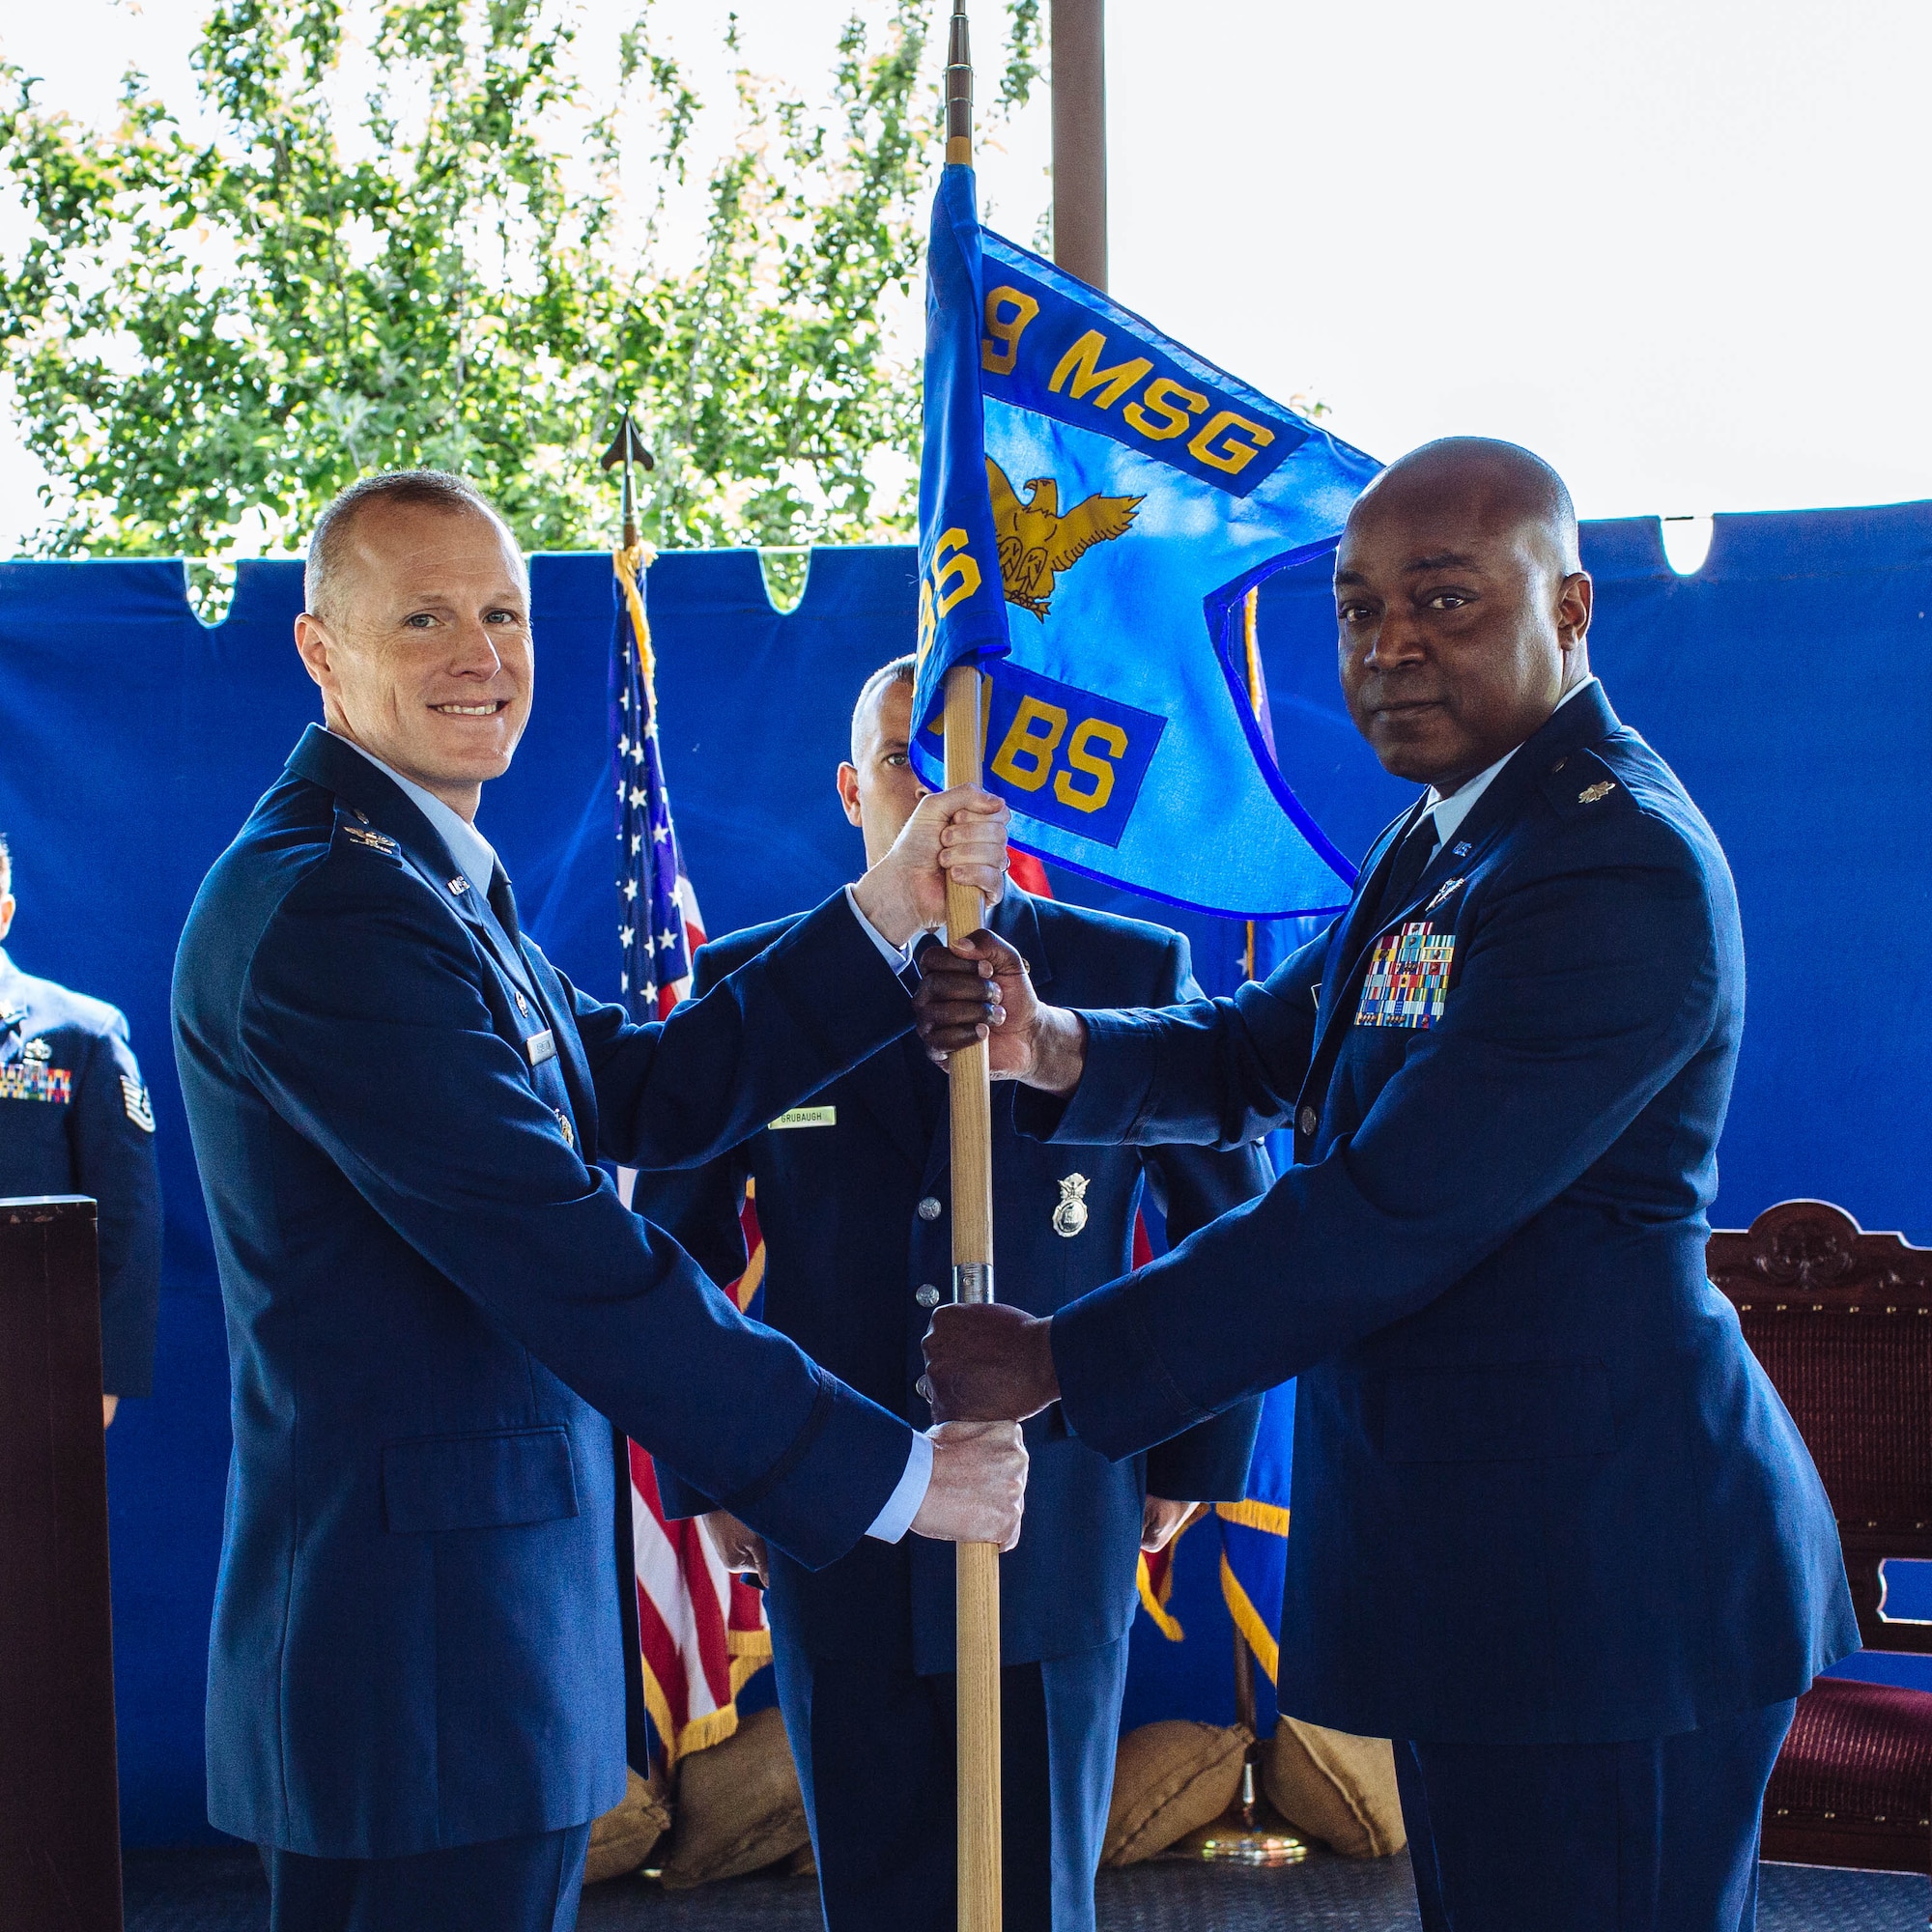 Col. Todd Stratton, 39th Air Base Wing Mission Support Group commander (left), presents the guidon to Lt. Col. Christopher Floyd , 717th Air Base Squadron commander (right), during the 717th ABS change of command ceremony May 16, 2017, at the Ankara Support Facility, Turkey. A change of command ceremony is a tradition that represents a formal transfer of authority and responsibility from the outgoing commander to the incoming commander. (U.S. Air Force courtesy photo)